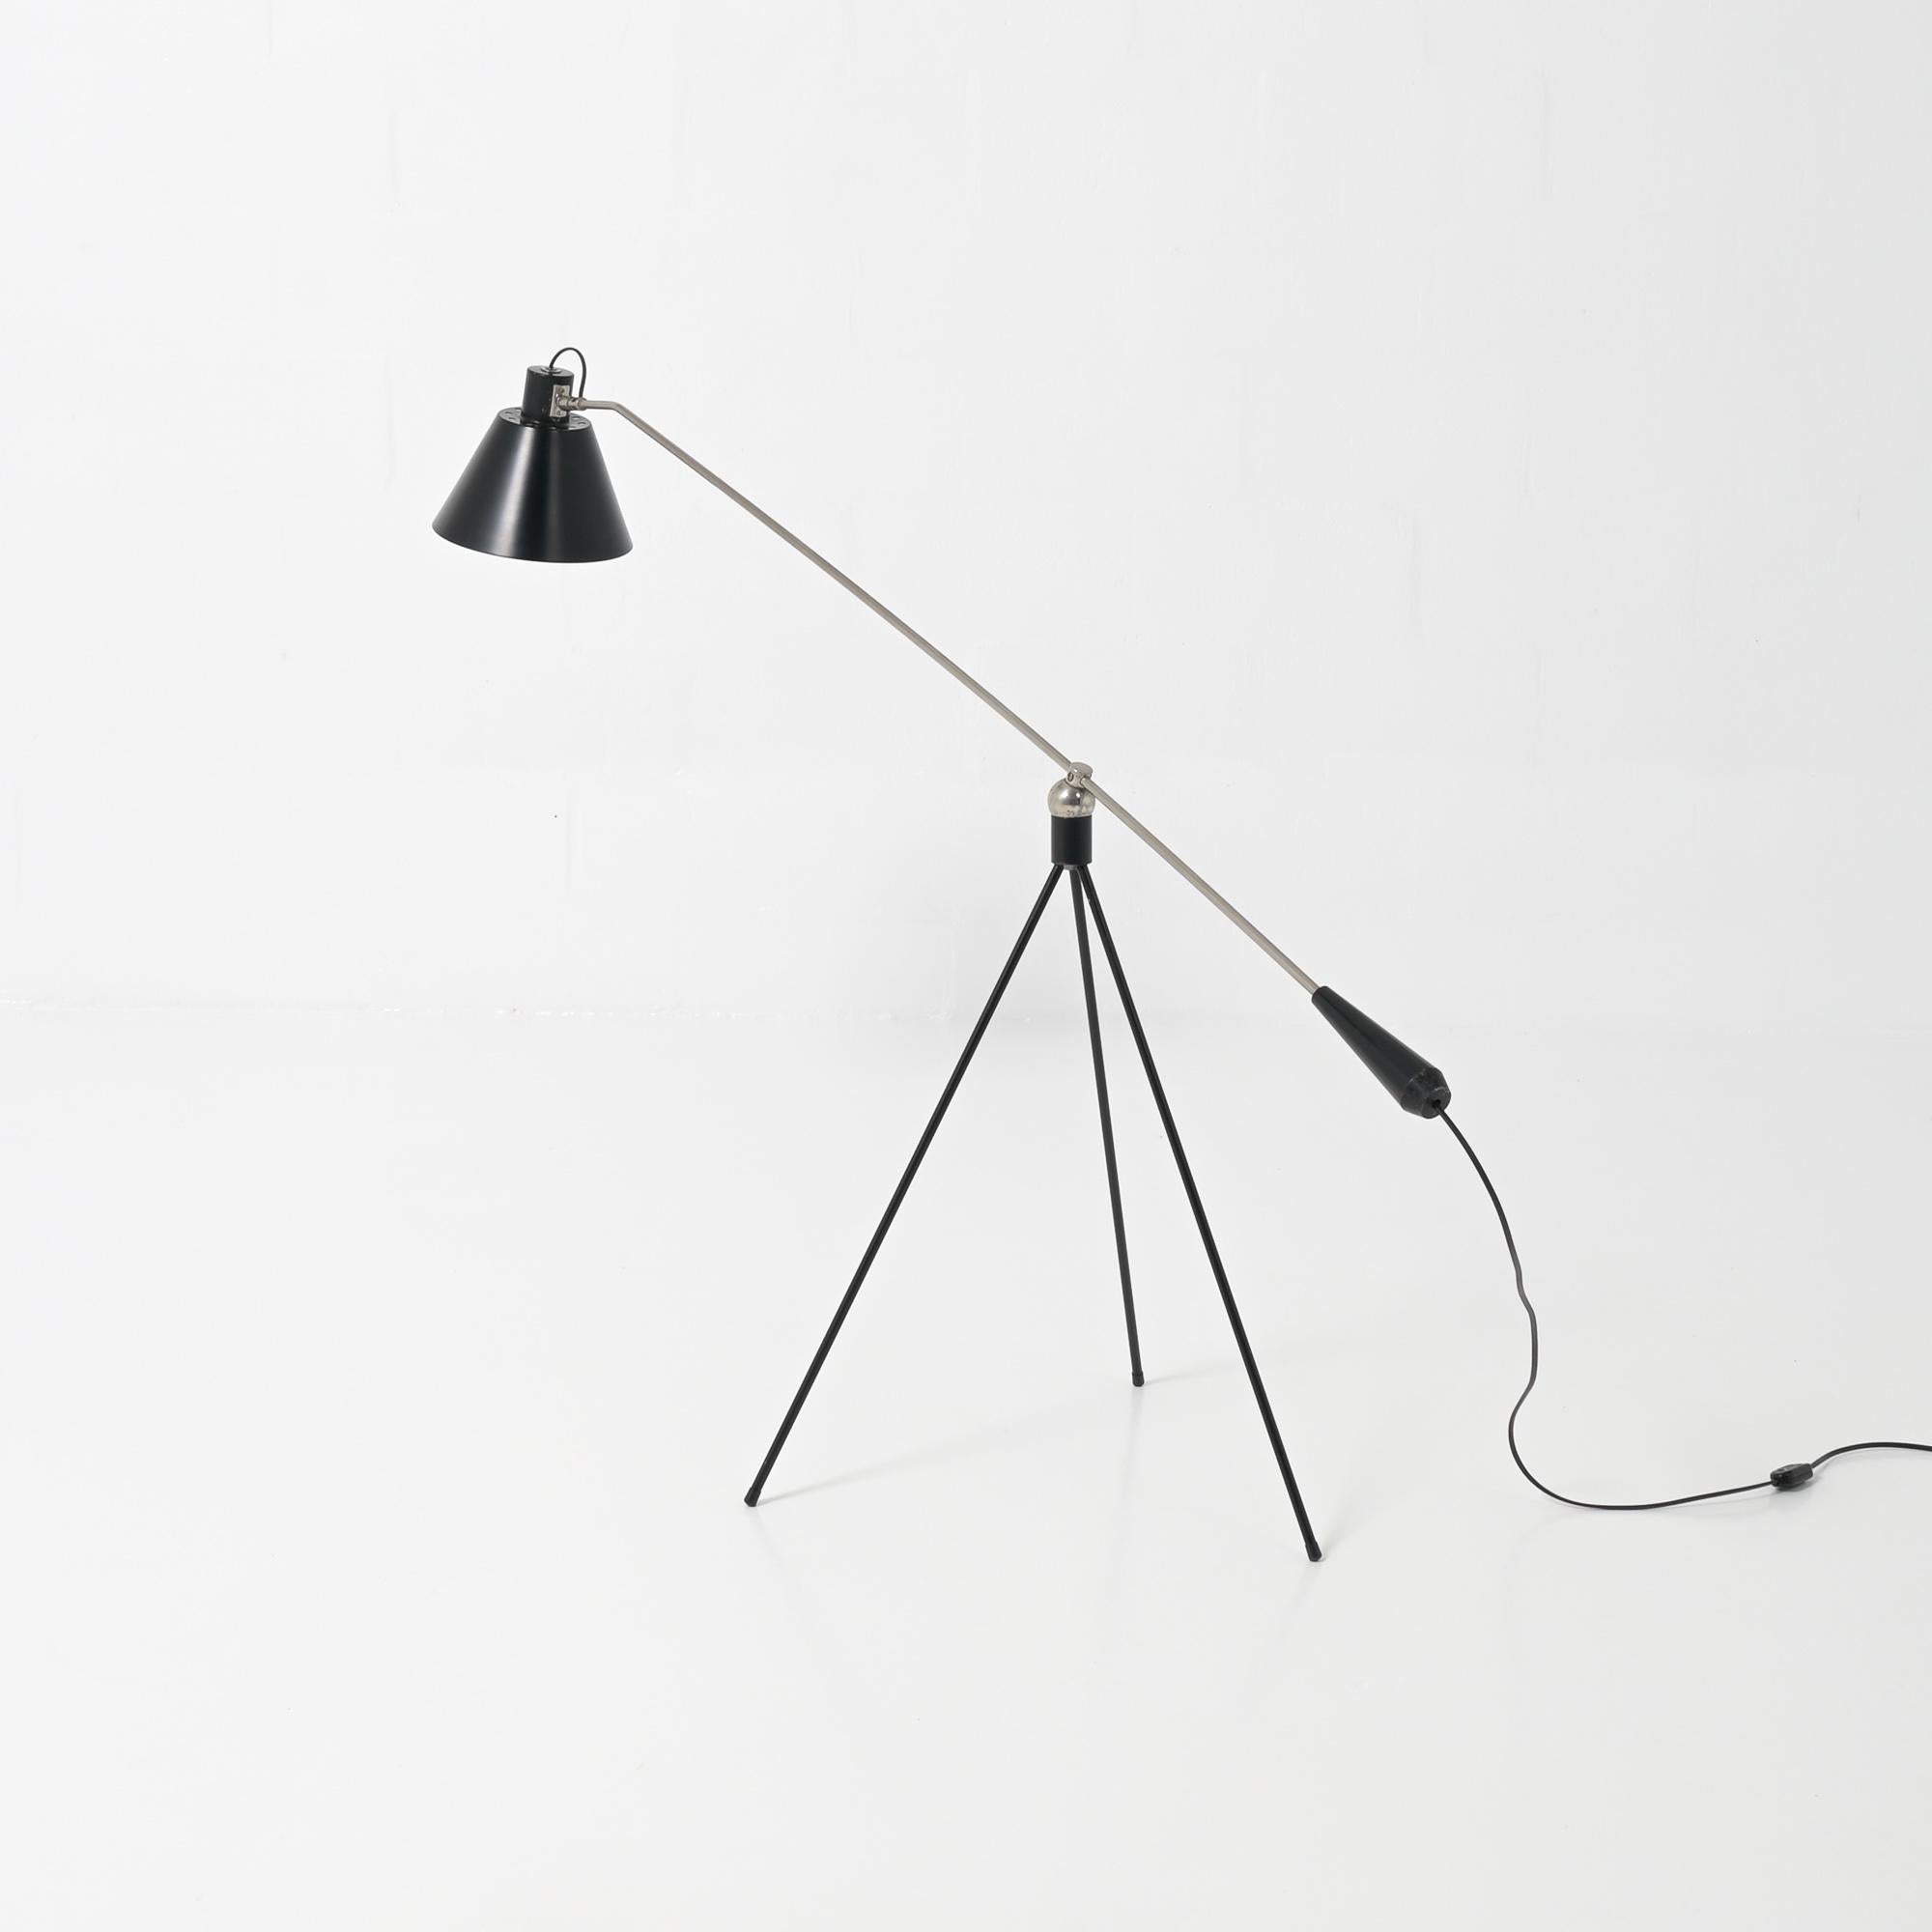 This magnificent floor lamp ‘Magneto’ was designed by H. Fillekes for Artiforte from 1954-1958.
This rare lamp was only produced for a short period.
The lamp has a black lacquered metal tripod foot which is connected to a balance arm using a round